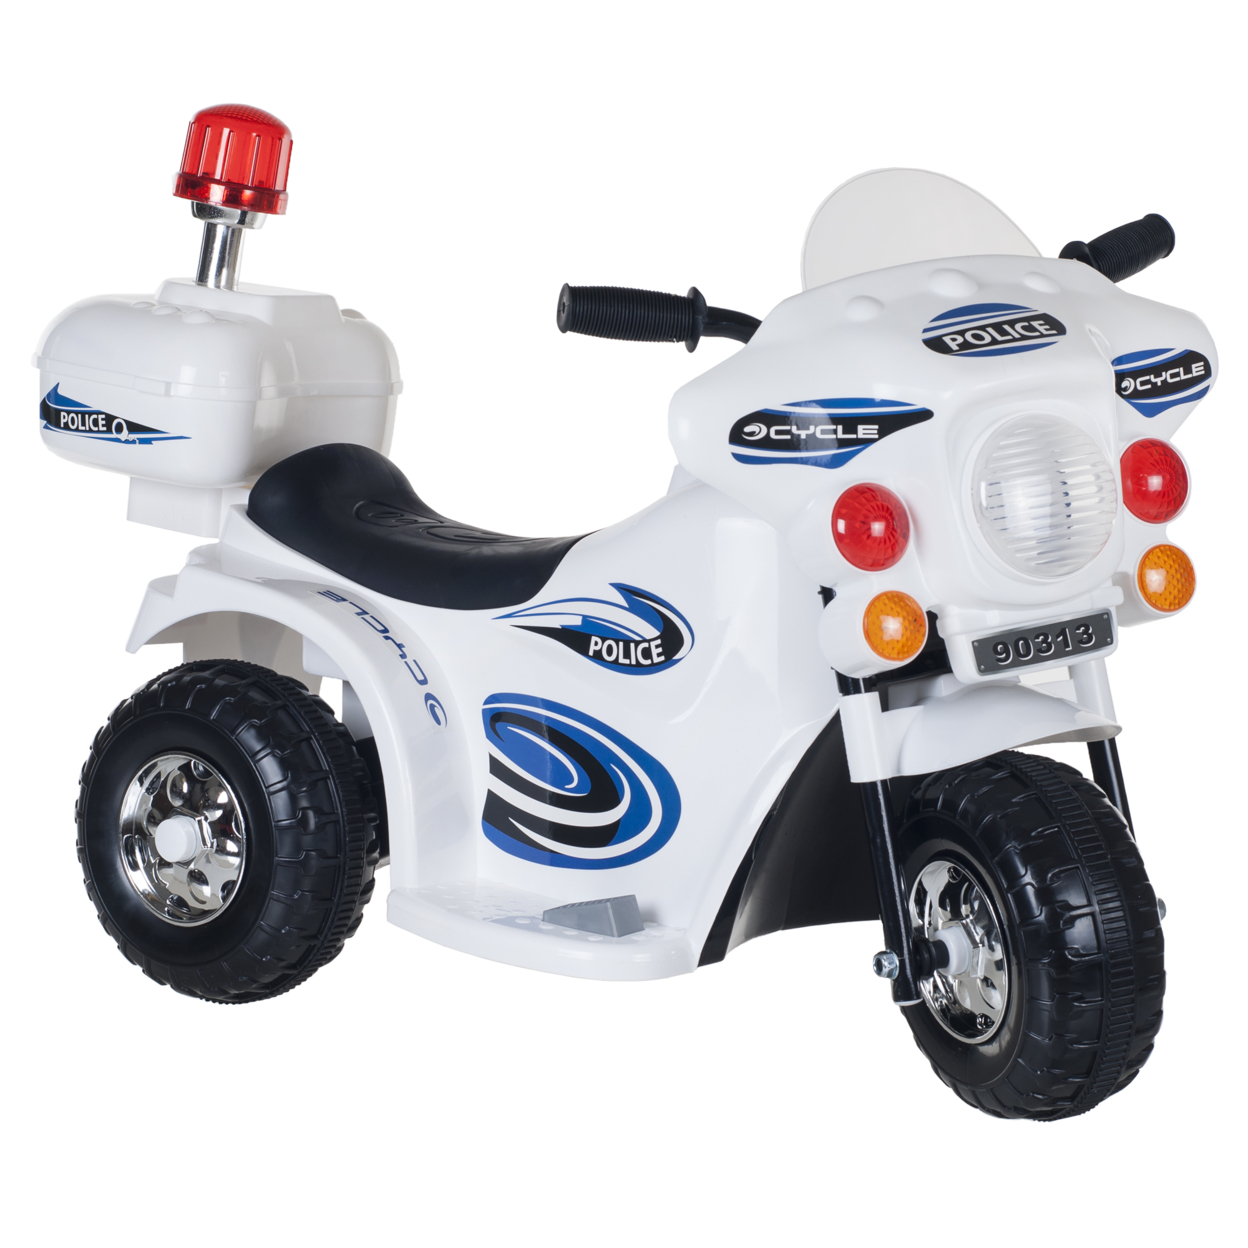 Lil' Rider Three Wheeled Motorcycle Ride-on - White Motorbike Battery Operated Ride On Toy 2-4 Yrs